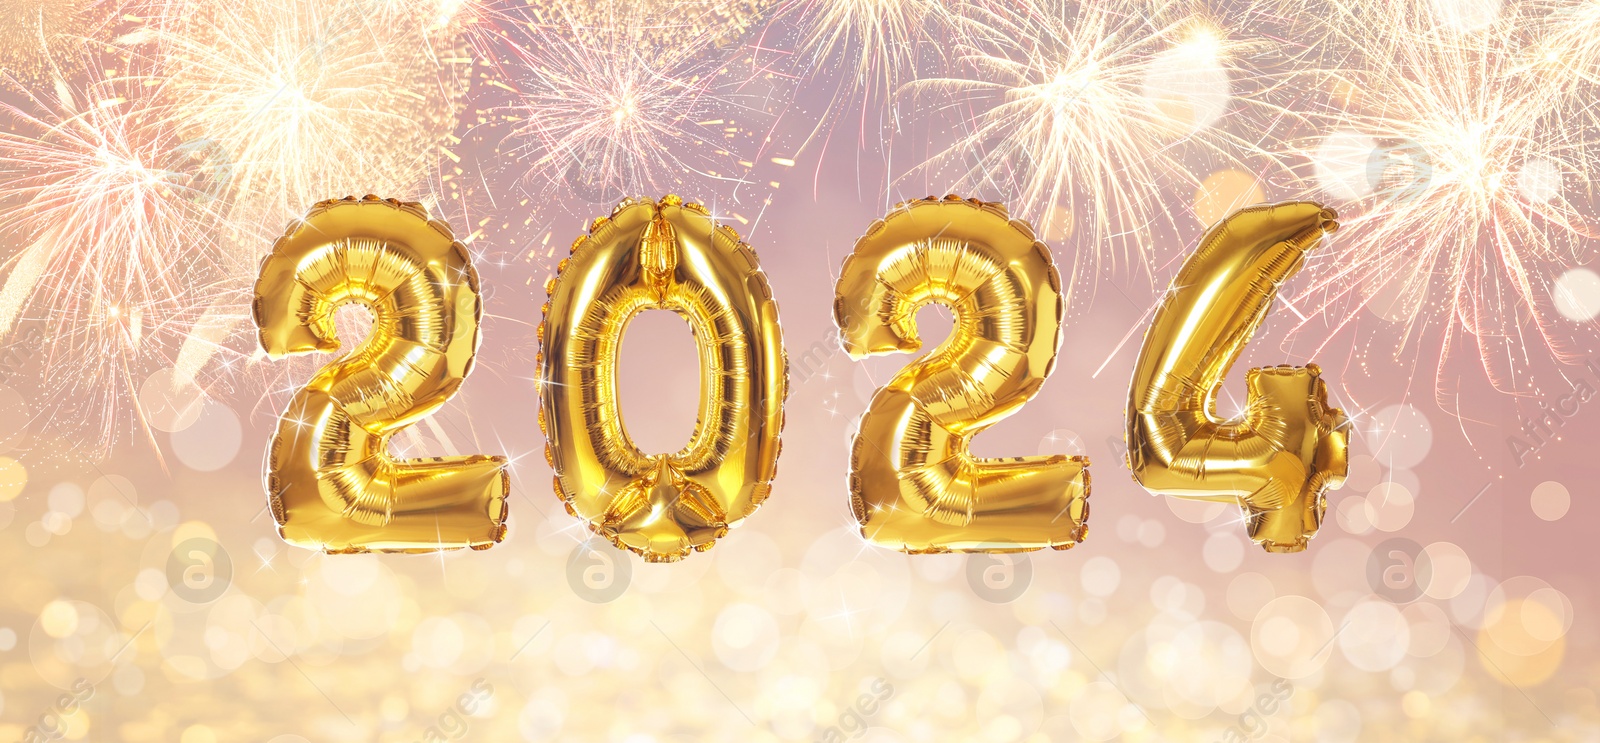 Image of New 2024 Year. Golden number shaped balloons and fireworks on color background with blurred lights, banner design